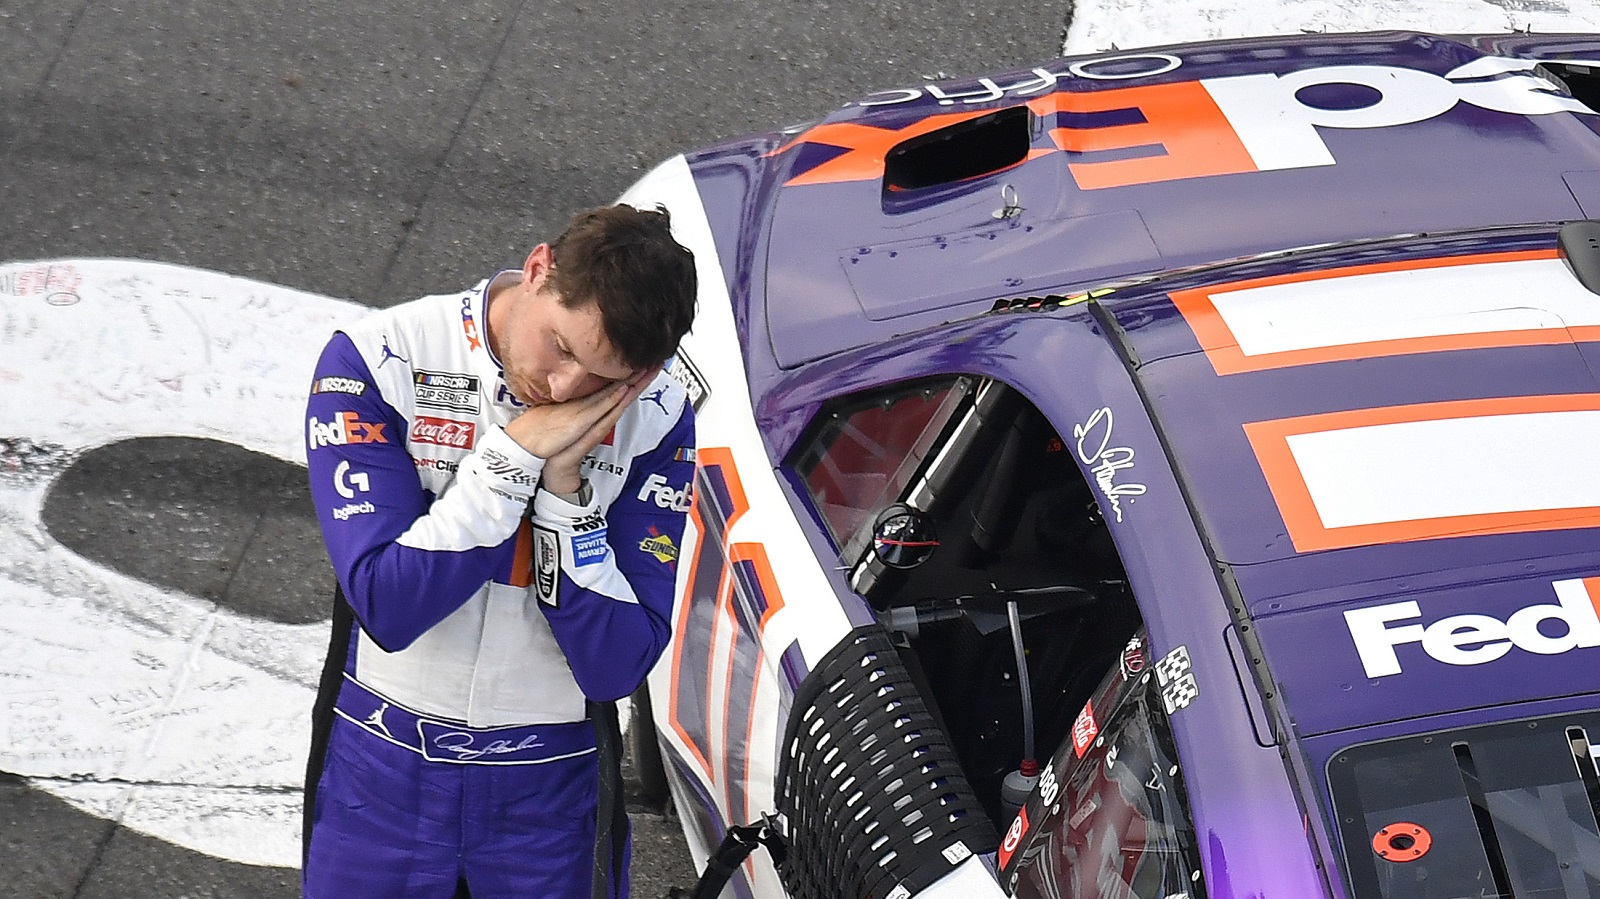 Denny Hamlin pretends to catch some nap time after winning the NASCAR Cup Series M&M's Fan Appreciation 400 at Pocono Raceway on July 24, 2022.